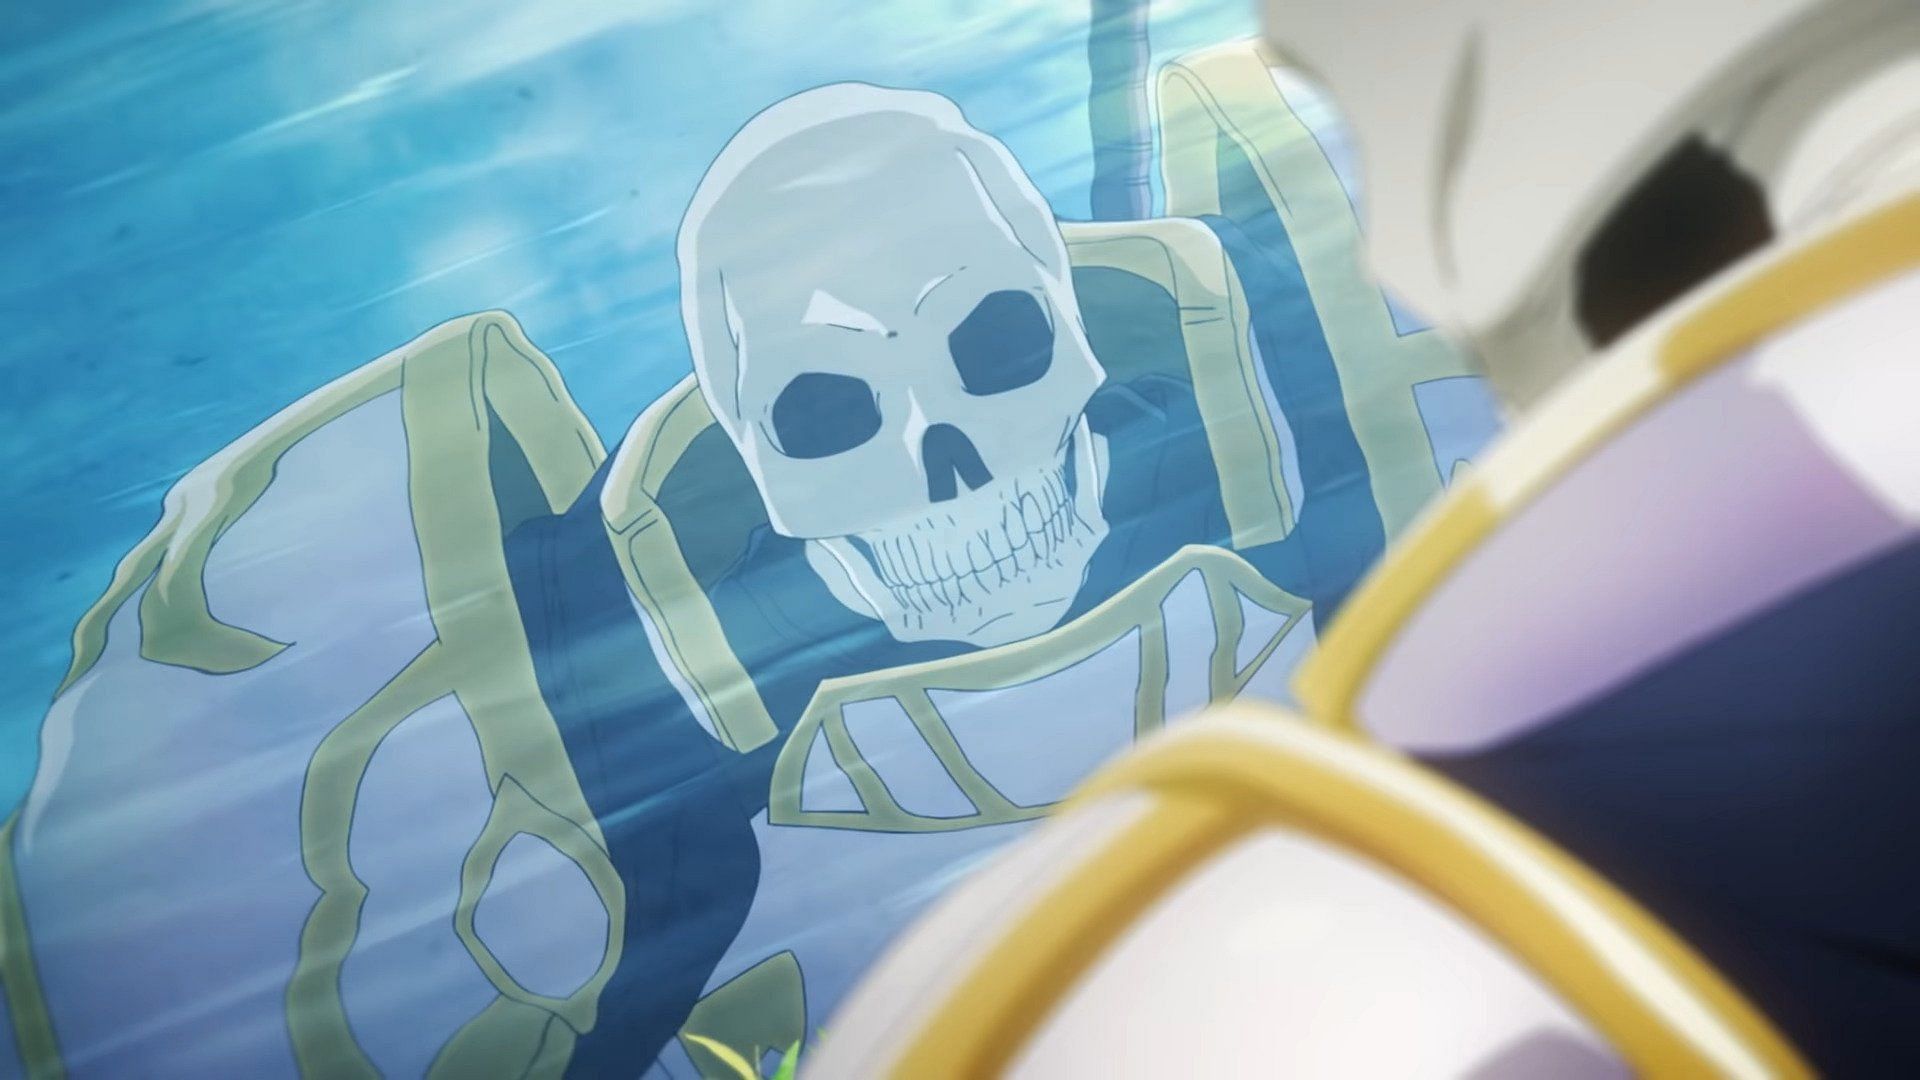 Anime Episode 05, Skeleton Knight In Another World Wiki